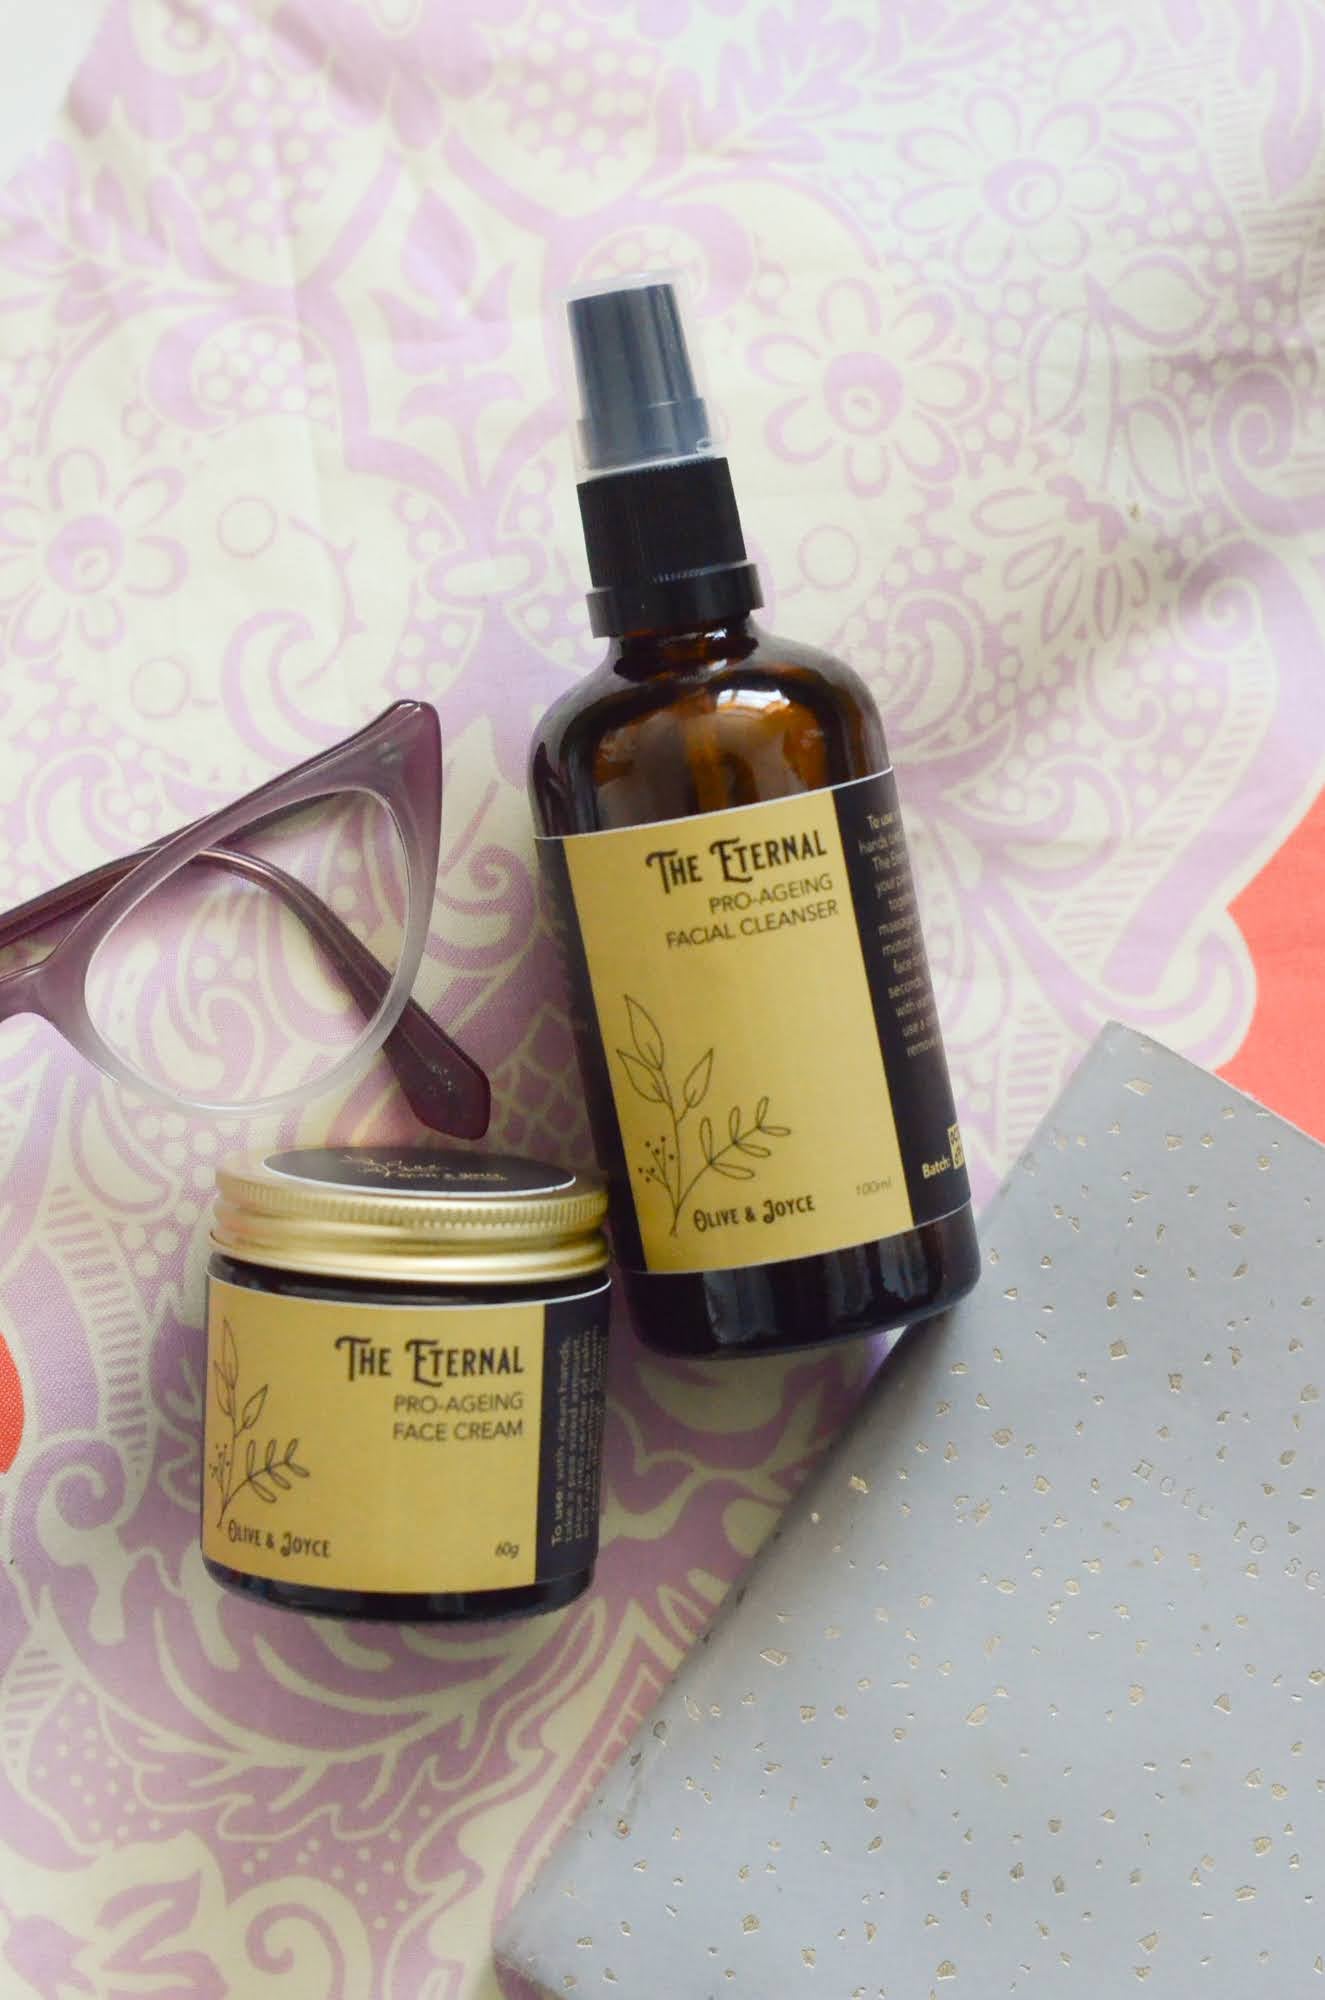 Subscription Box Natural skincare for older skin oil cleanser and face cream set by the natural skincare company